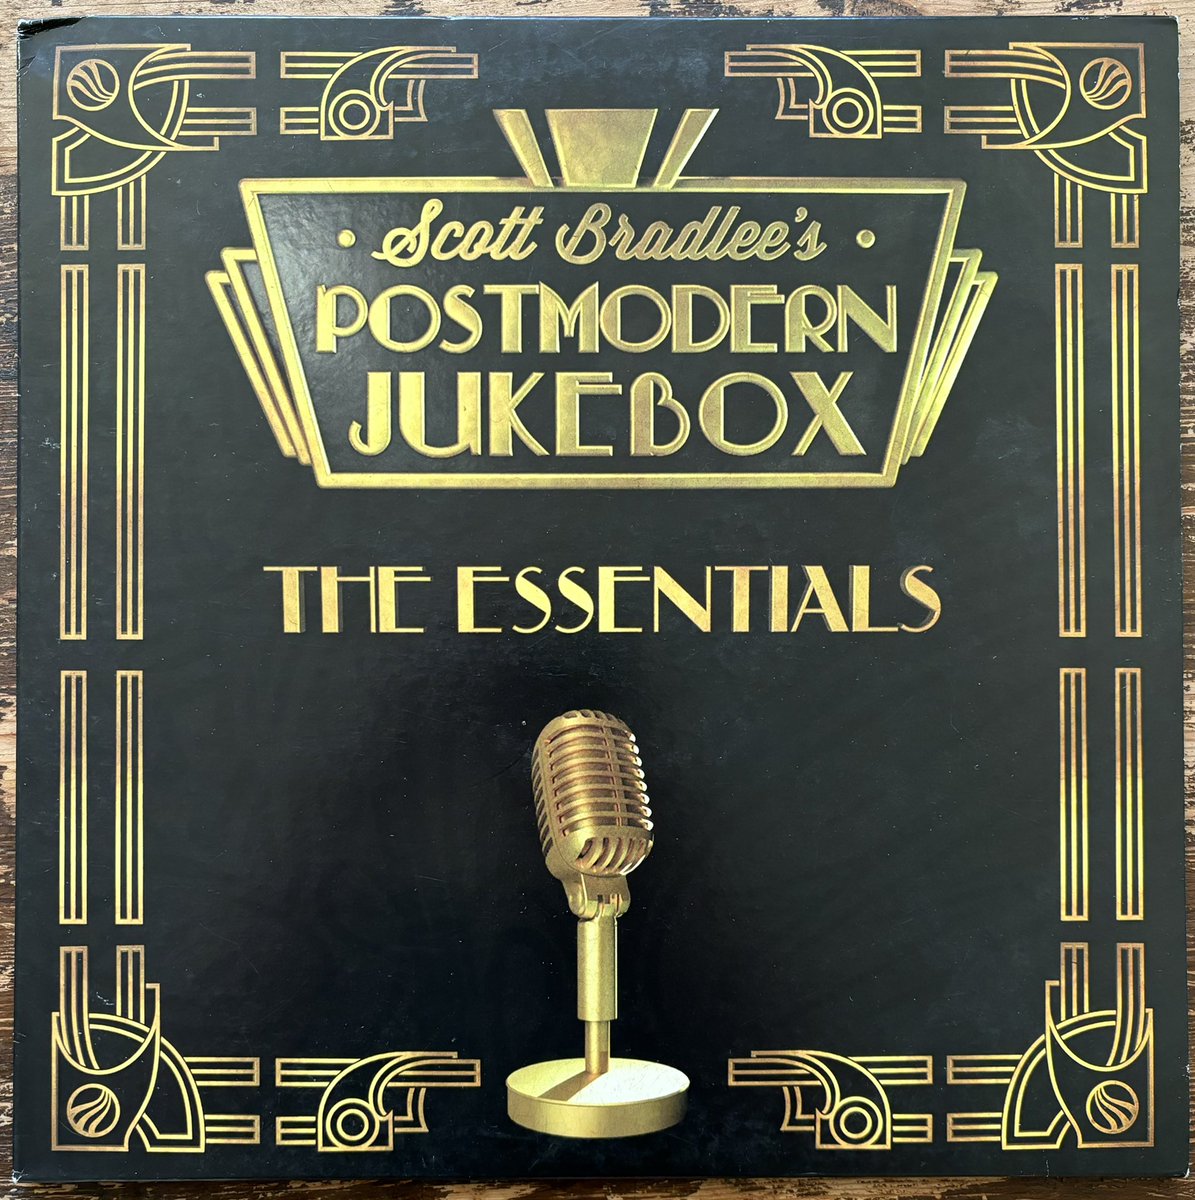 Just in, for those who like their contemporary classics with a more vintage sound… dm for details #scottbradleespostmodernjukebox #postmodernjukebox #theessentials #jazz #swing #southsiderecordsglasgow instagram.com/p/C6PE8r1tknu/…